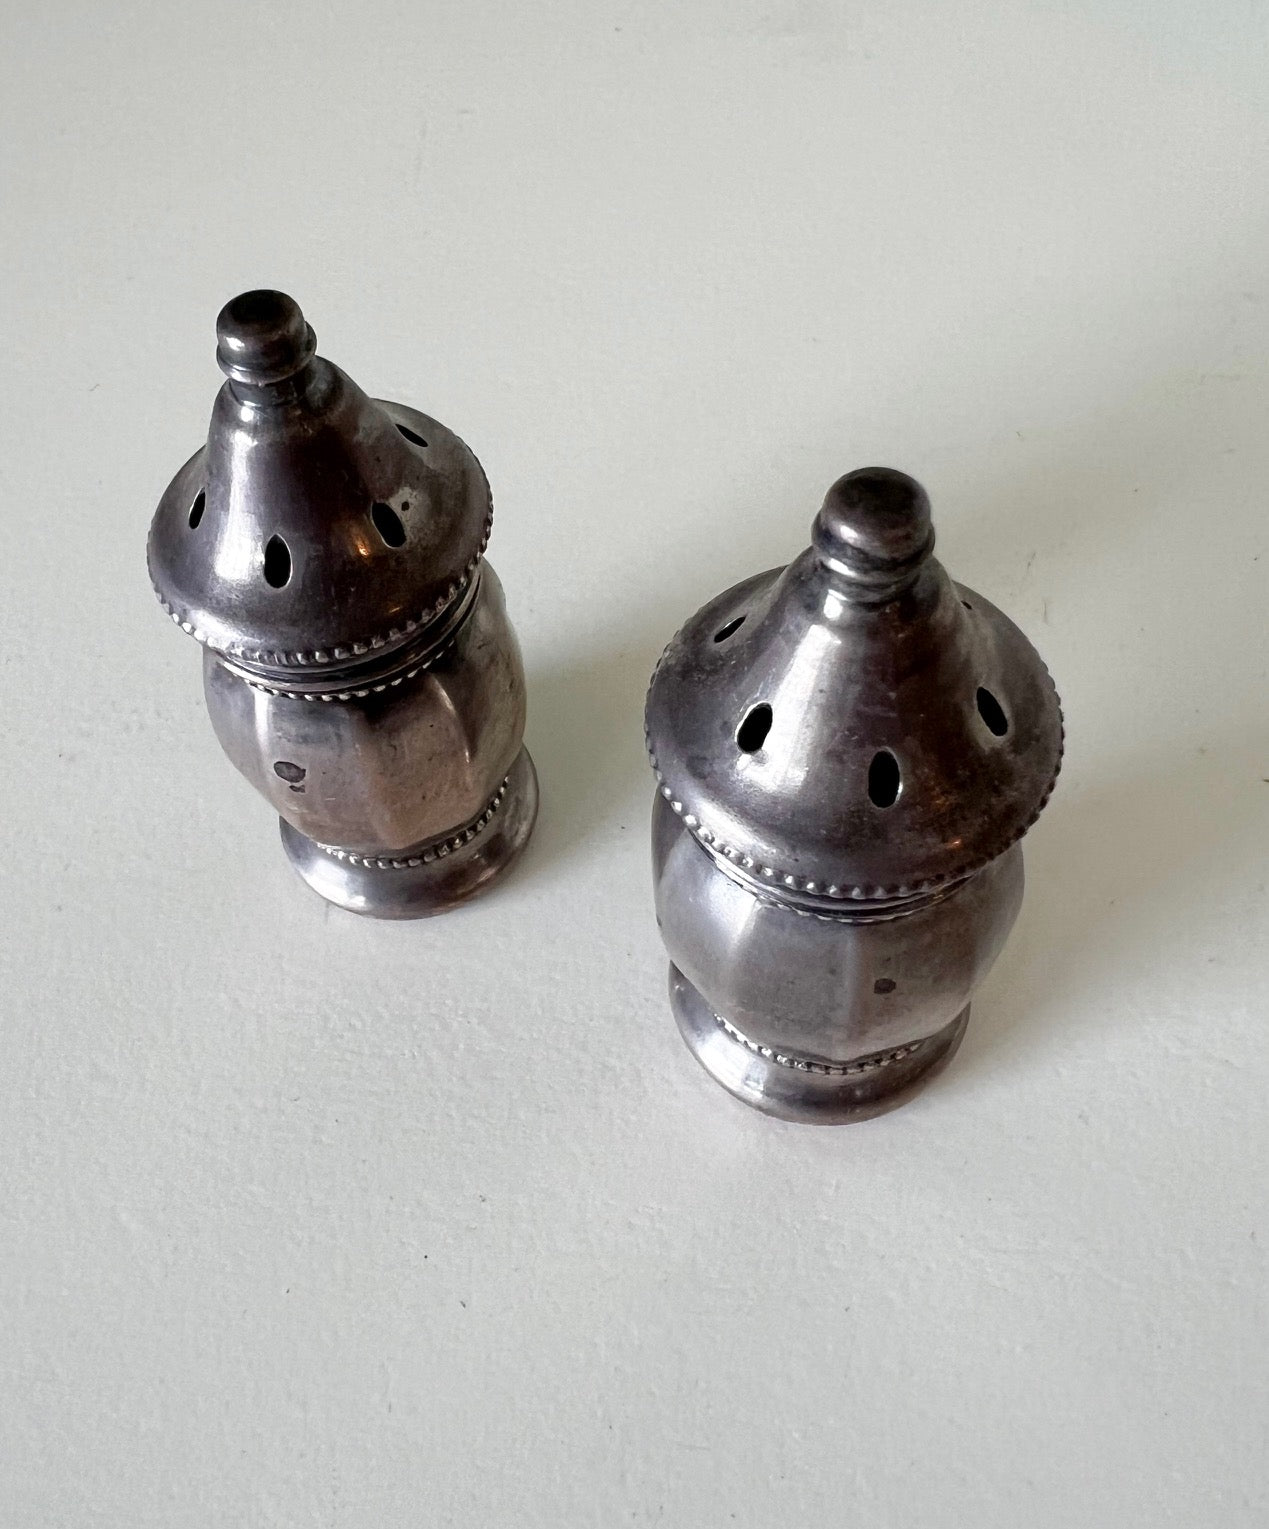 Top view of collectible Silverware Salt and Pepper Shakers